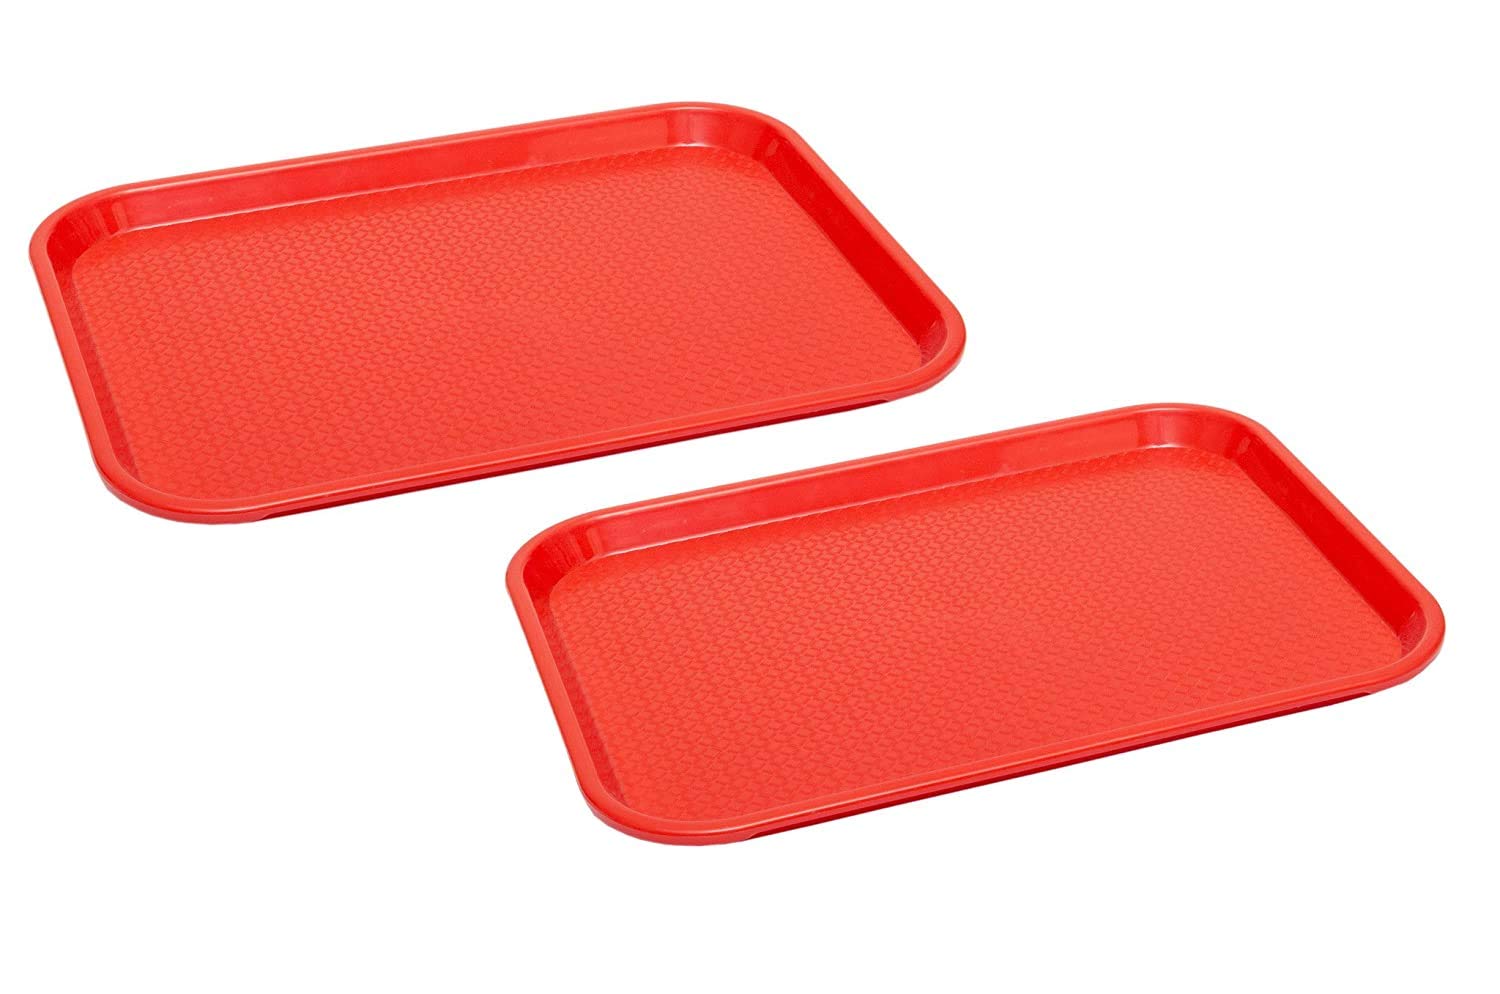 NJ Rectangular Plastic Serving Tray, Red Color Anti Skid Tray for Restaurant, Home and Hotel use : 2 Pcs Set